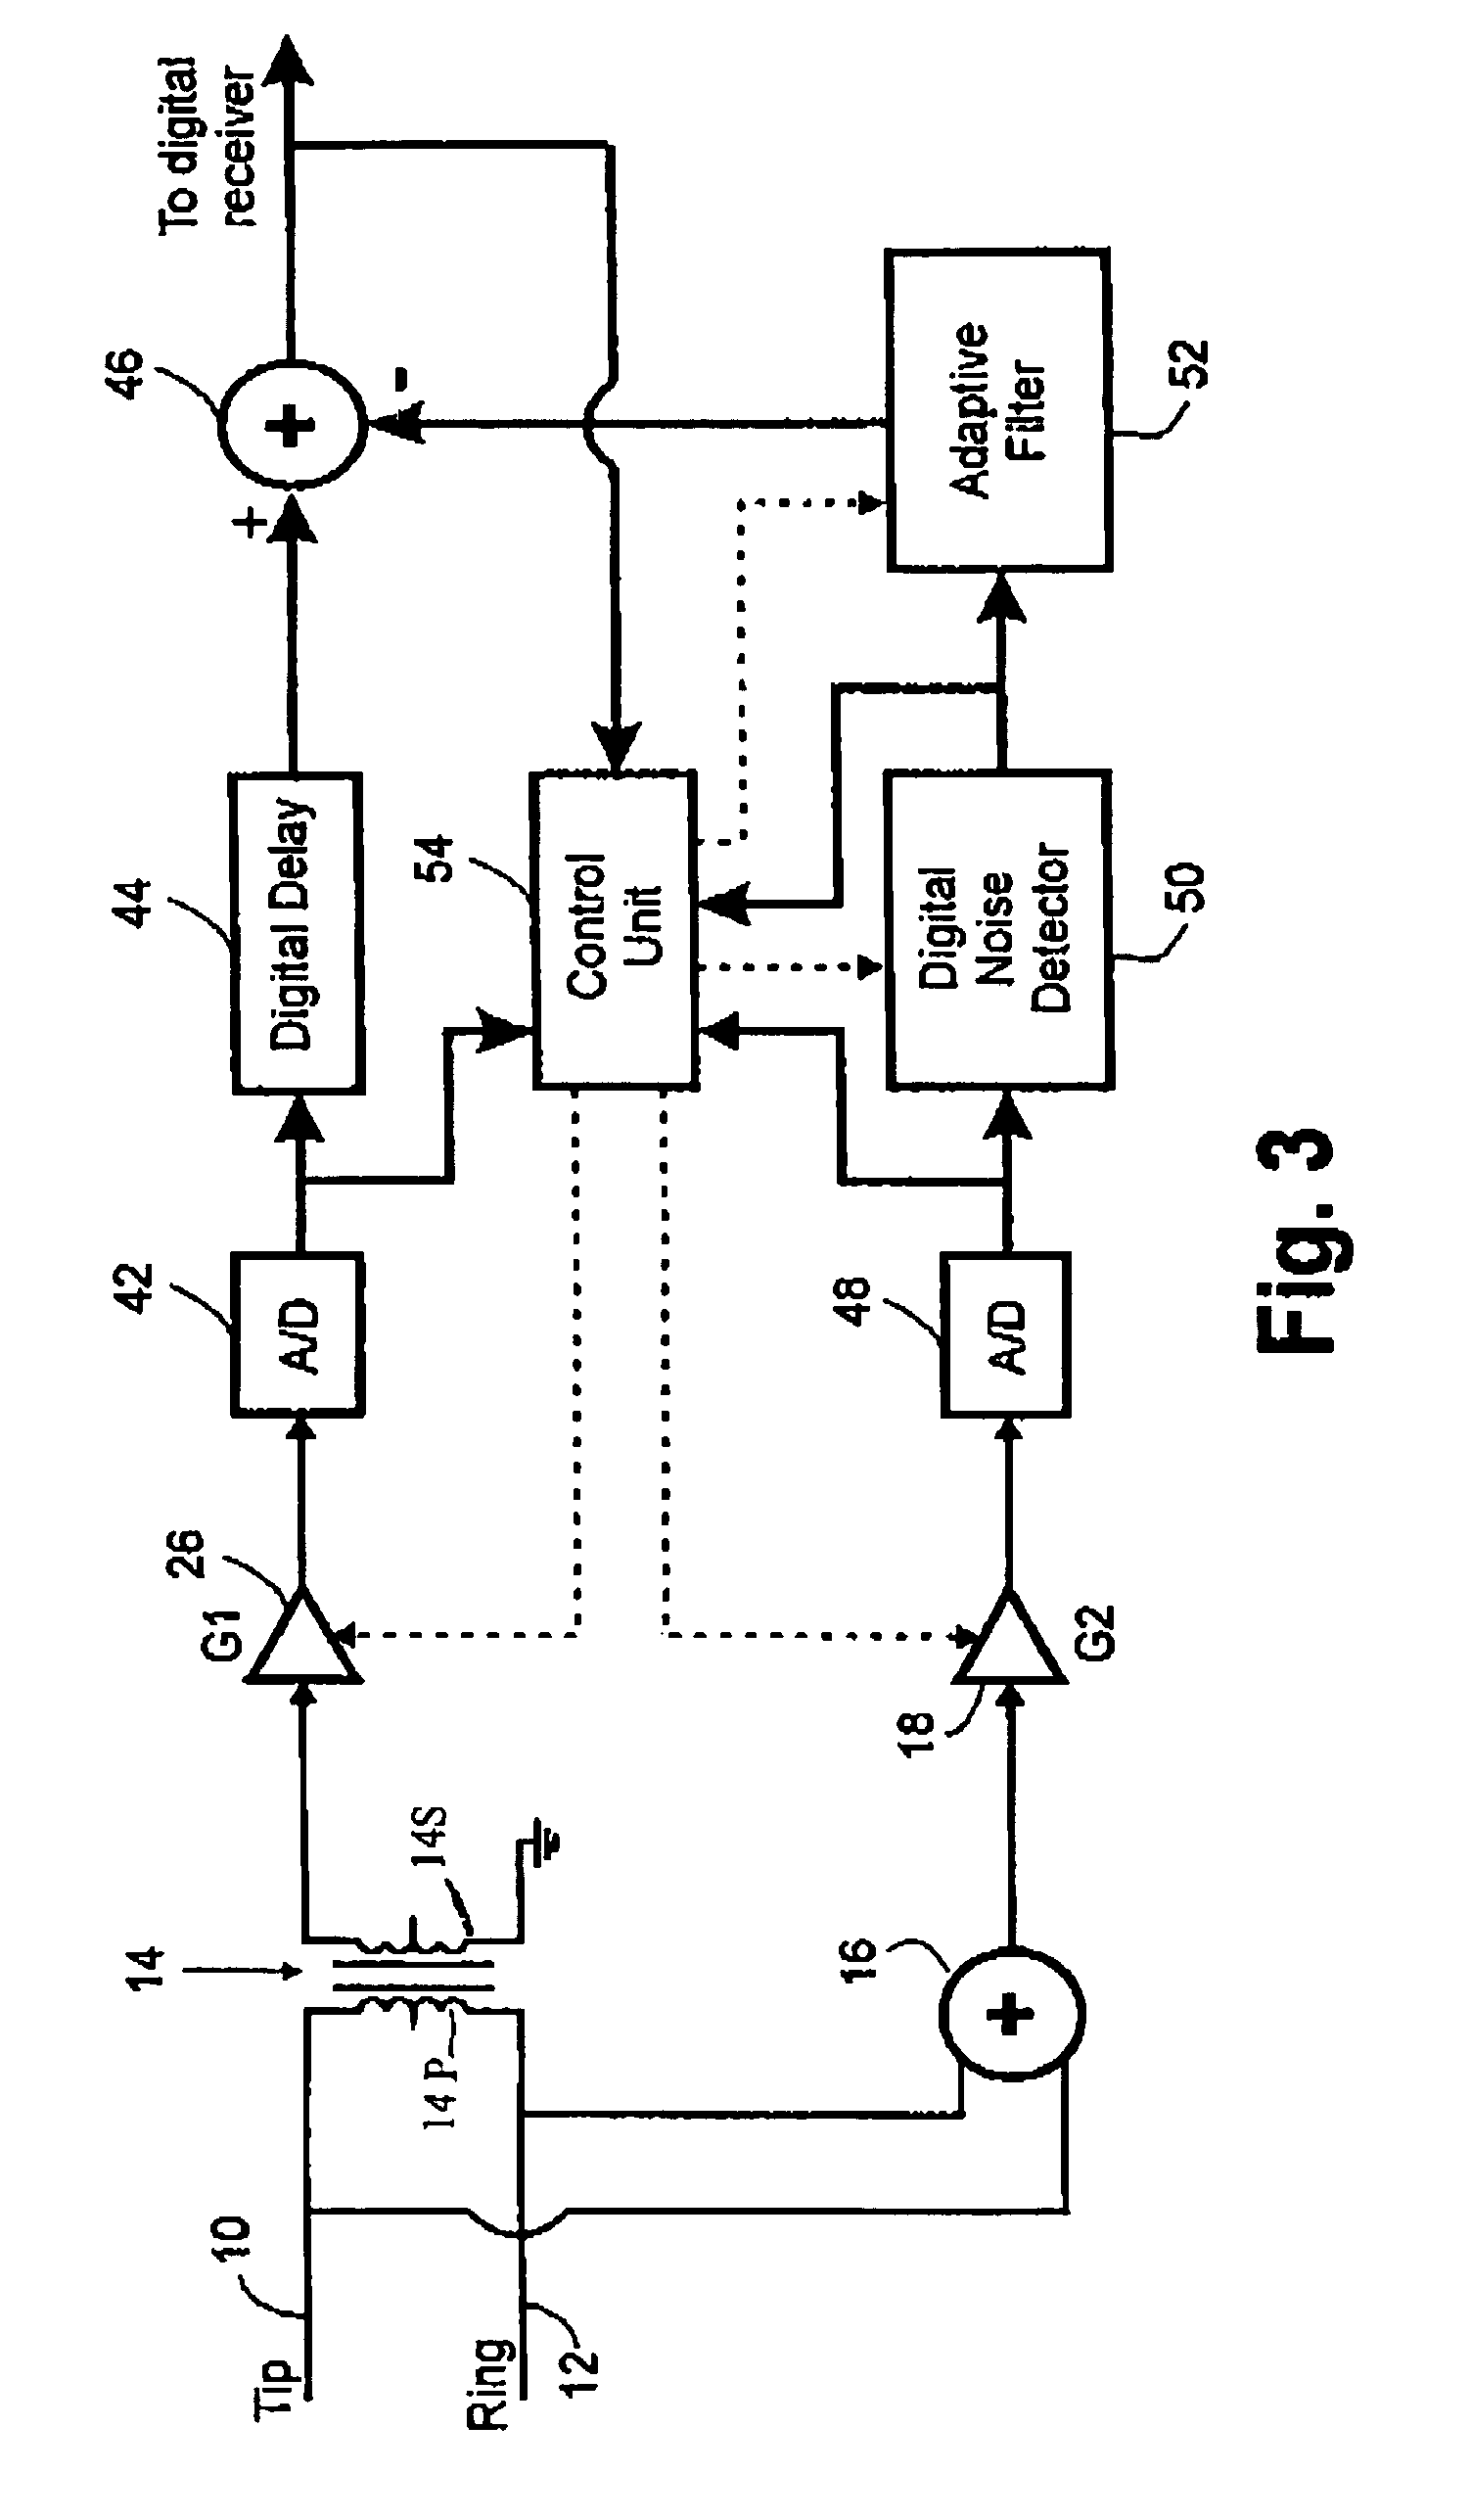 Method and apparatus for cancelling common mode noise occurring in communications channels